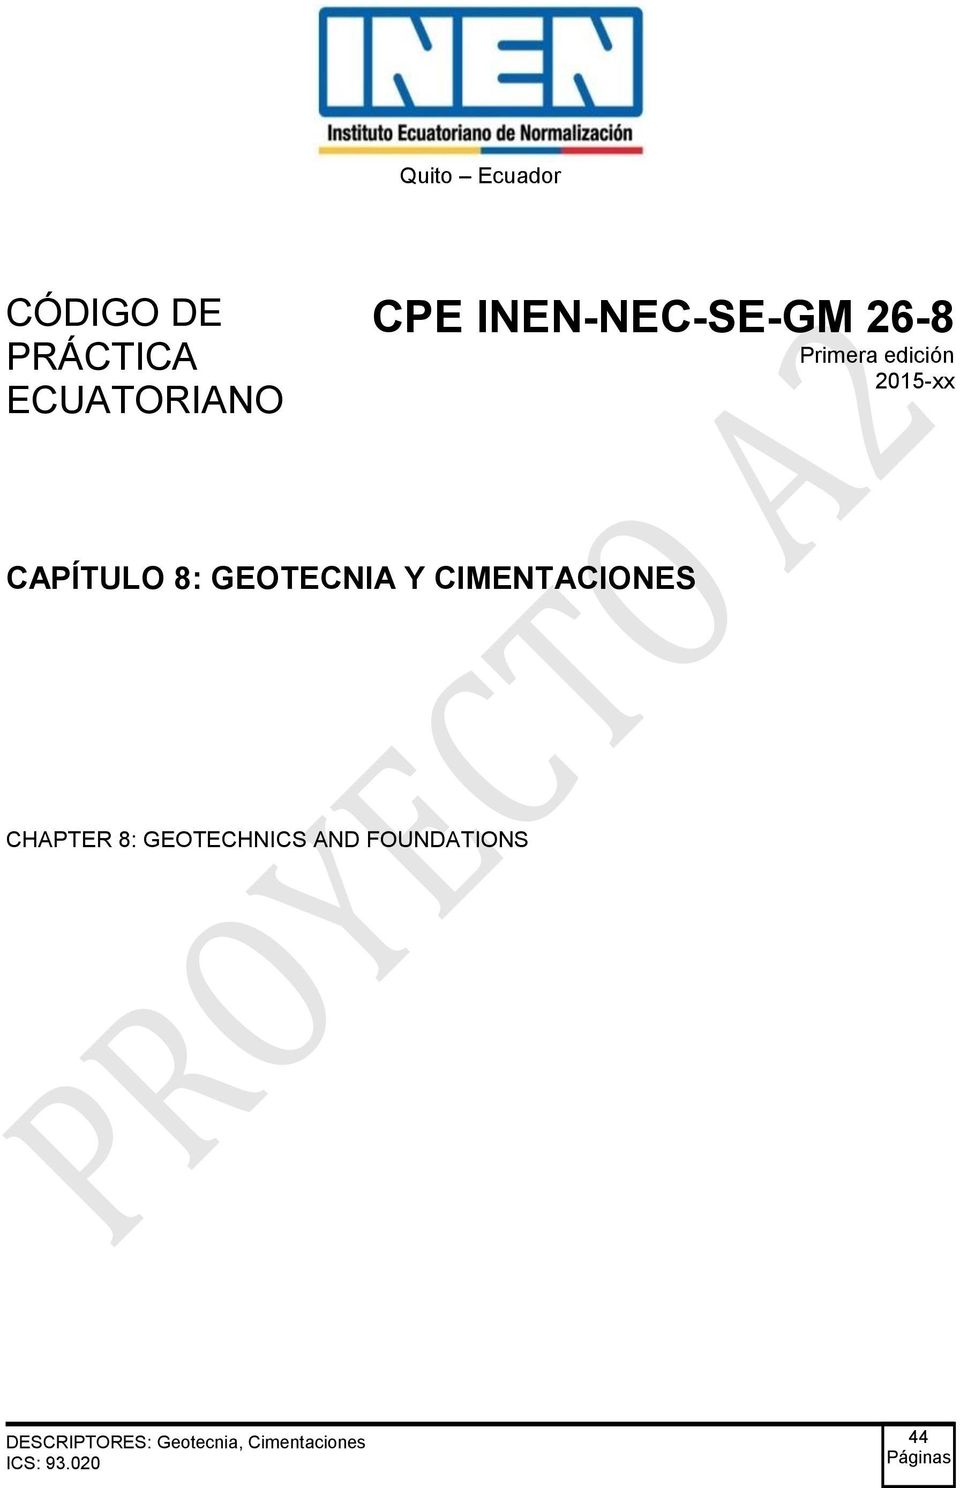 GEOTECNIA Y CIMENTACIONES CHAPTER 8: GEOTECHNICS AND